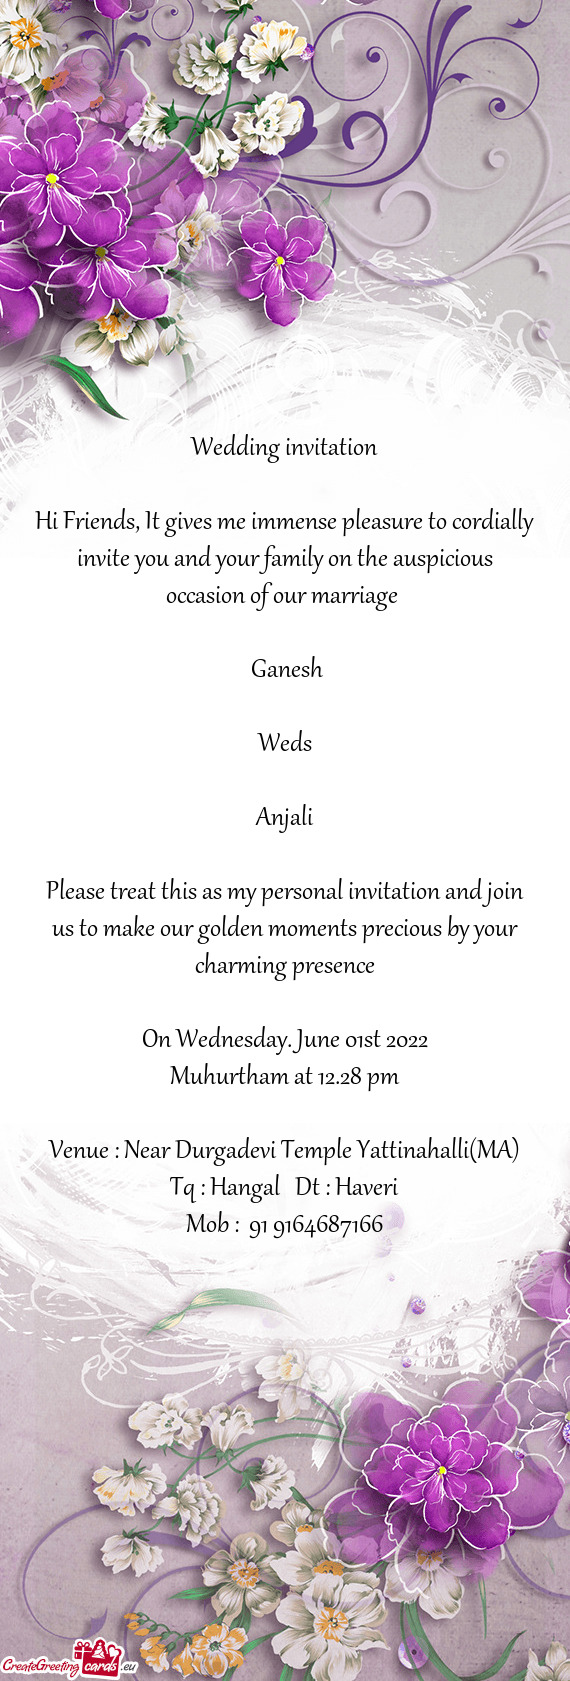 Hi Friends, It gives me immense pleasure to cordially invite you and your family on the auspicious o